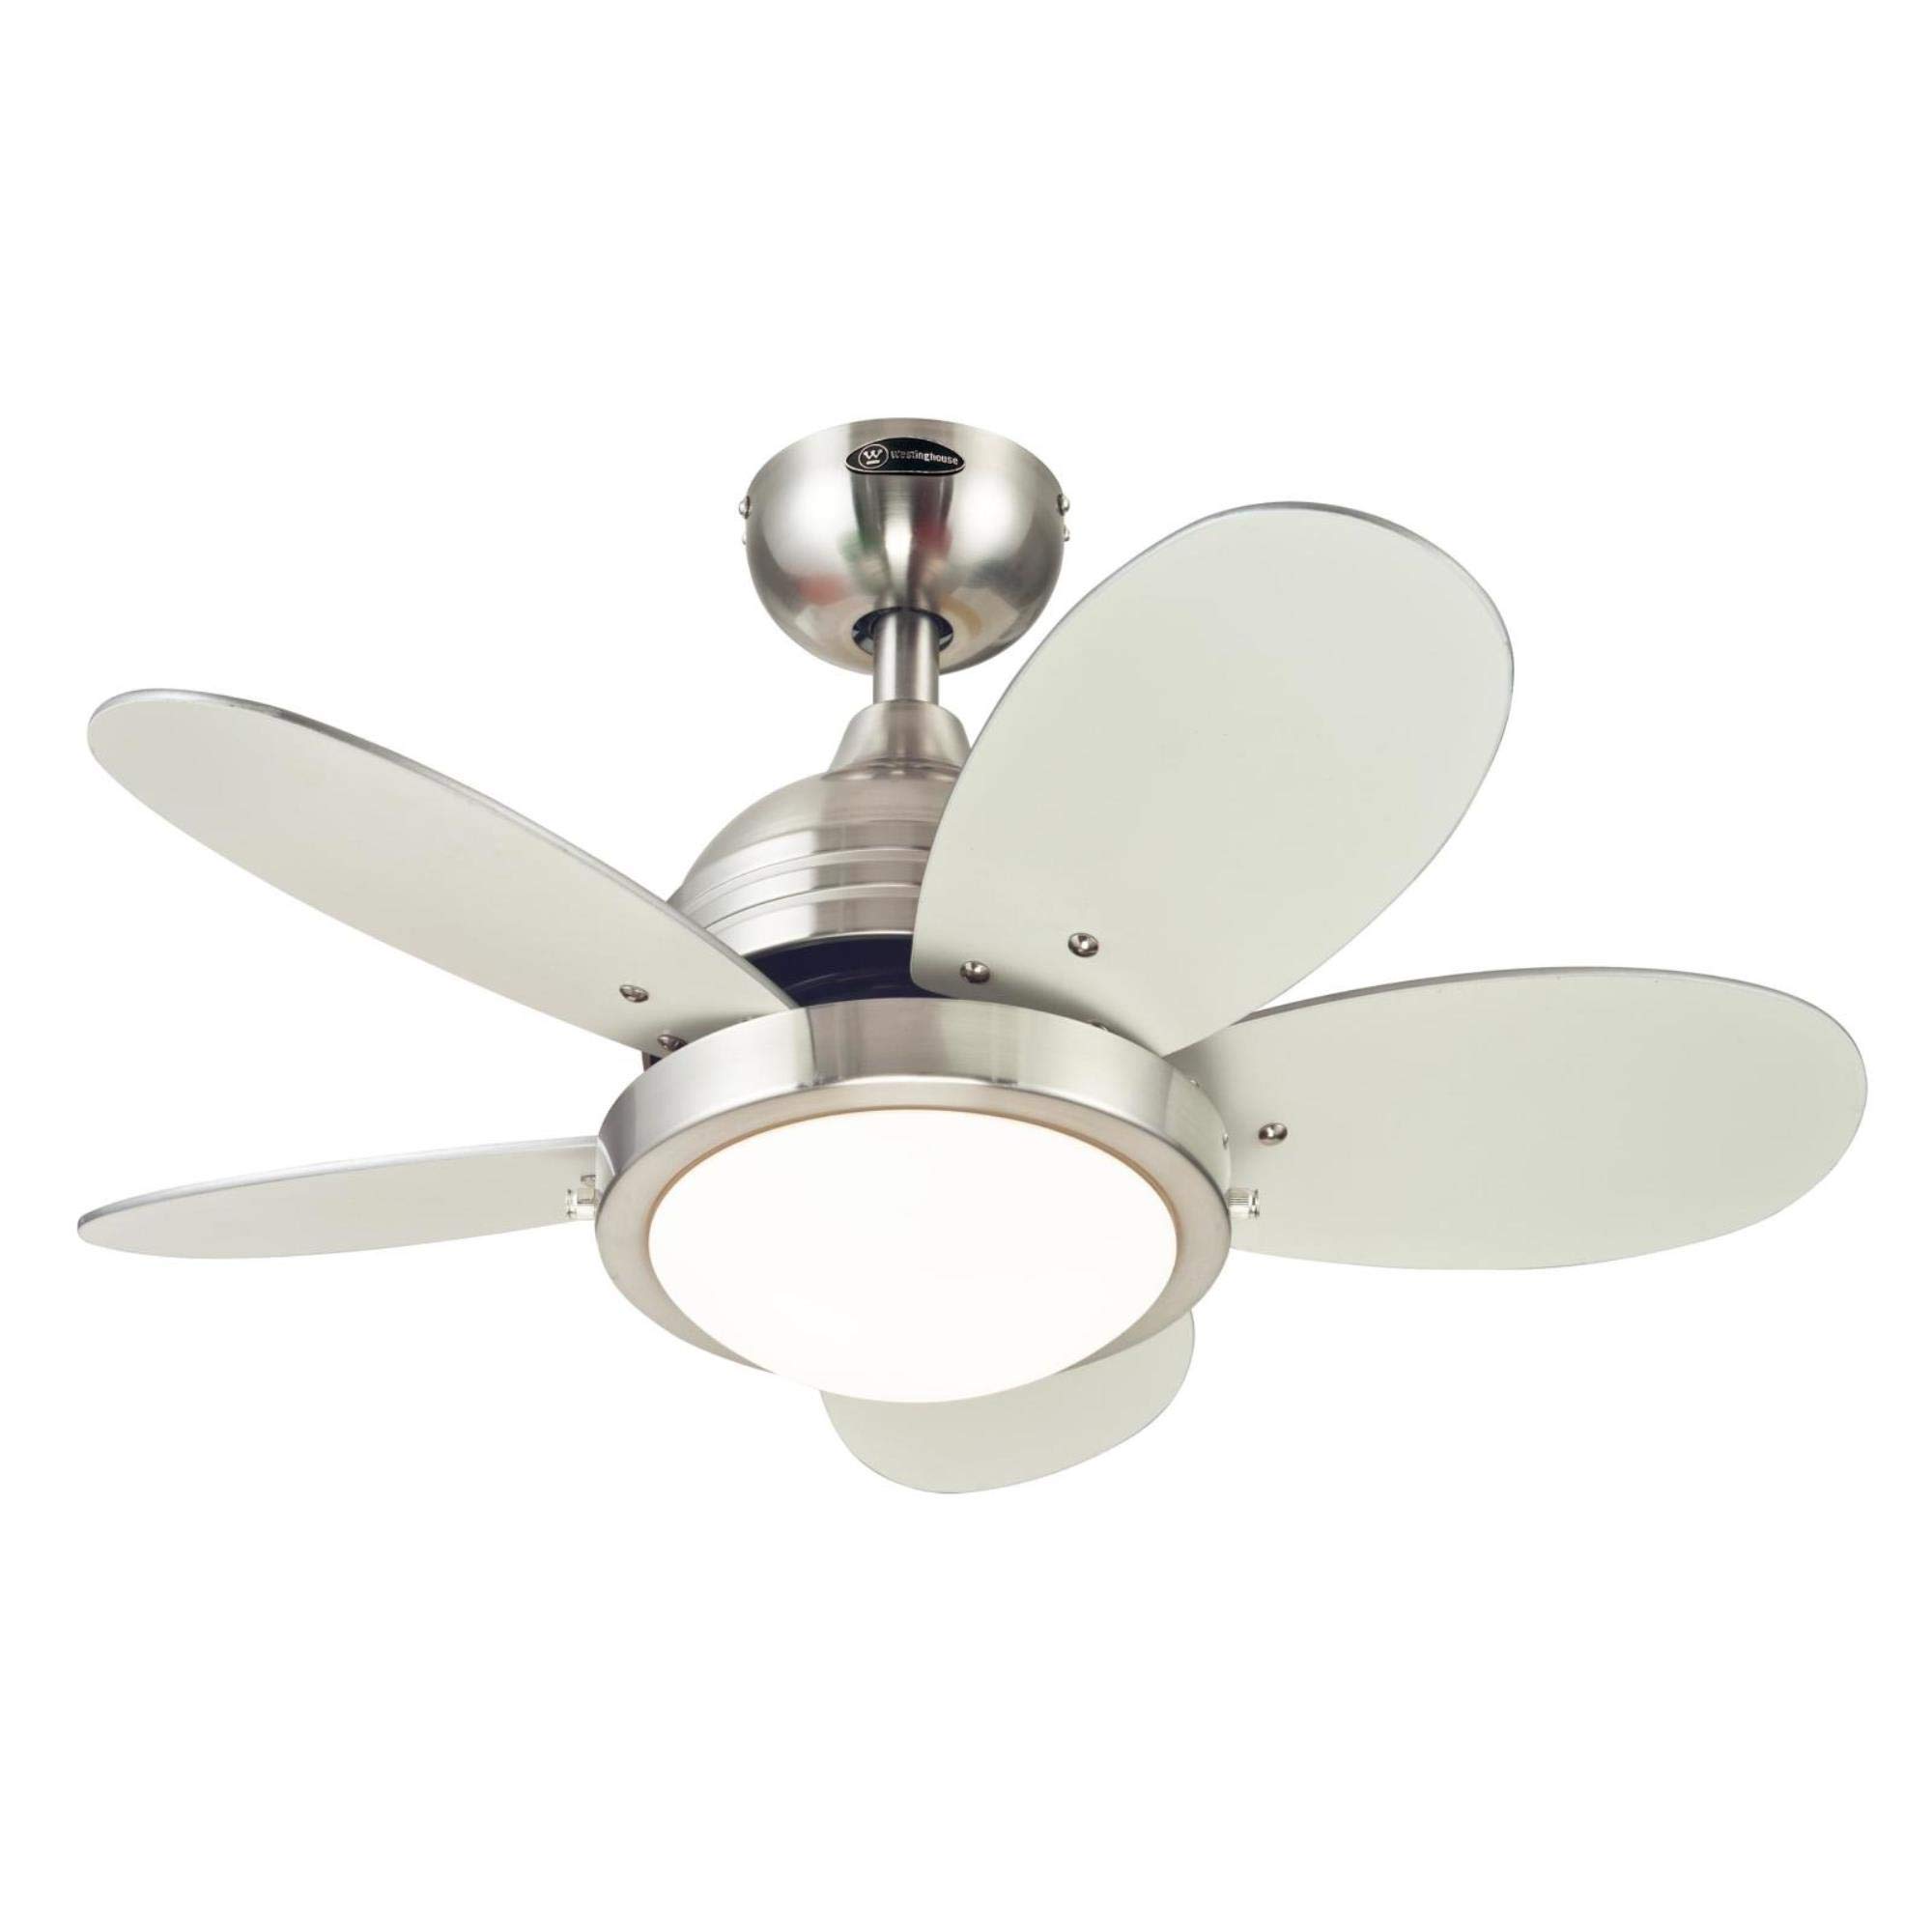 Westinghouse Lighting 7223600 Roundabout Indoor Ceiling Fan with Light, 30 Inch, Brushed Nickel